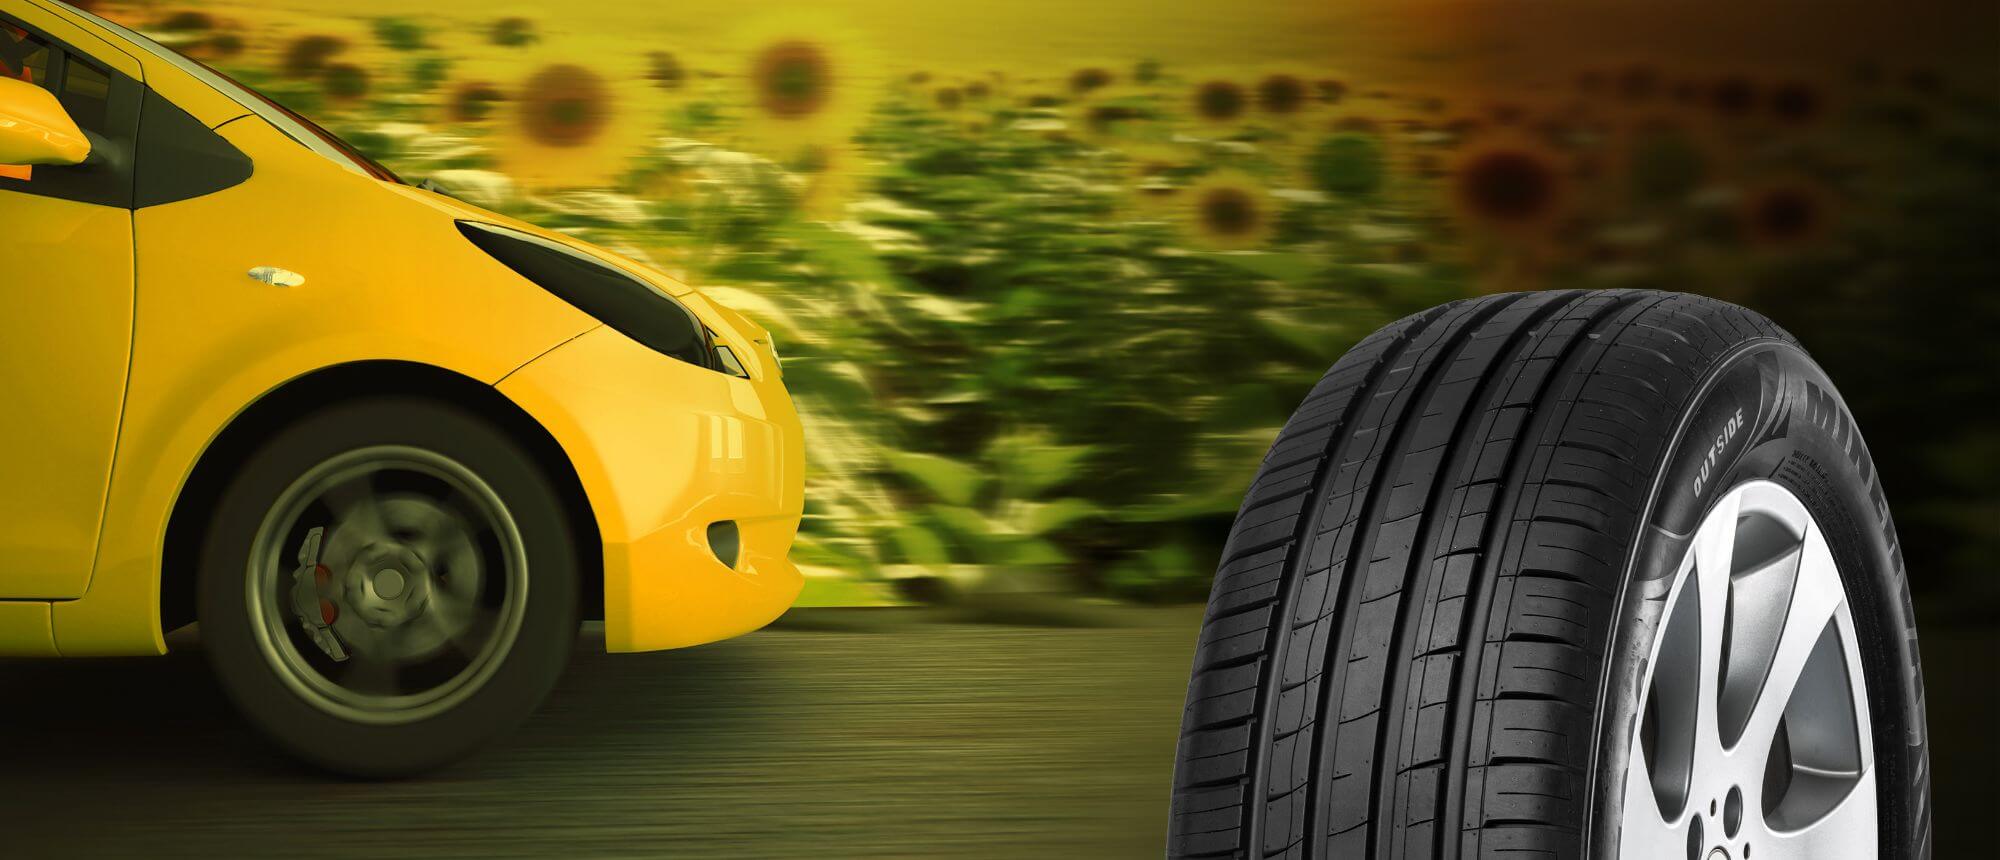 Minerva Tire With Yellow Car